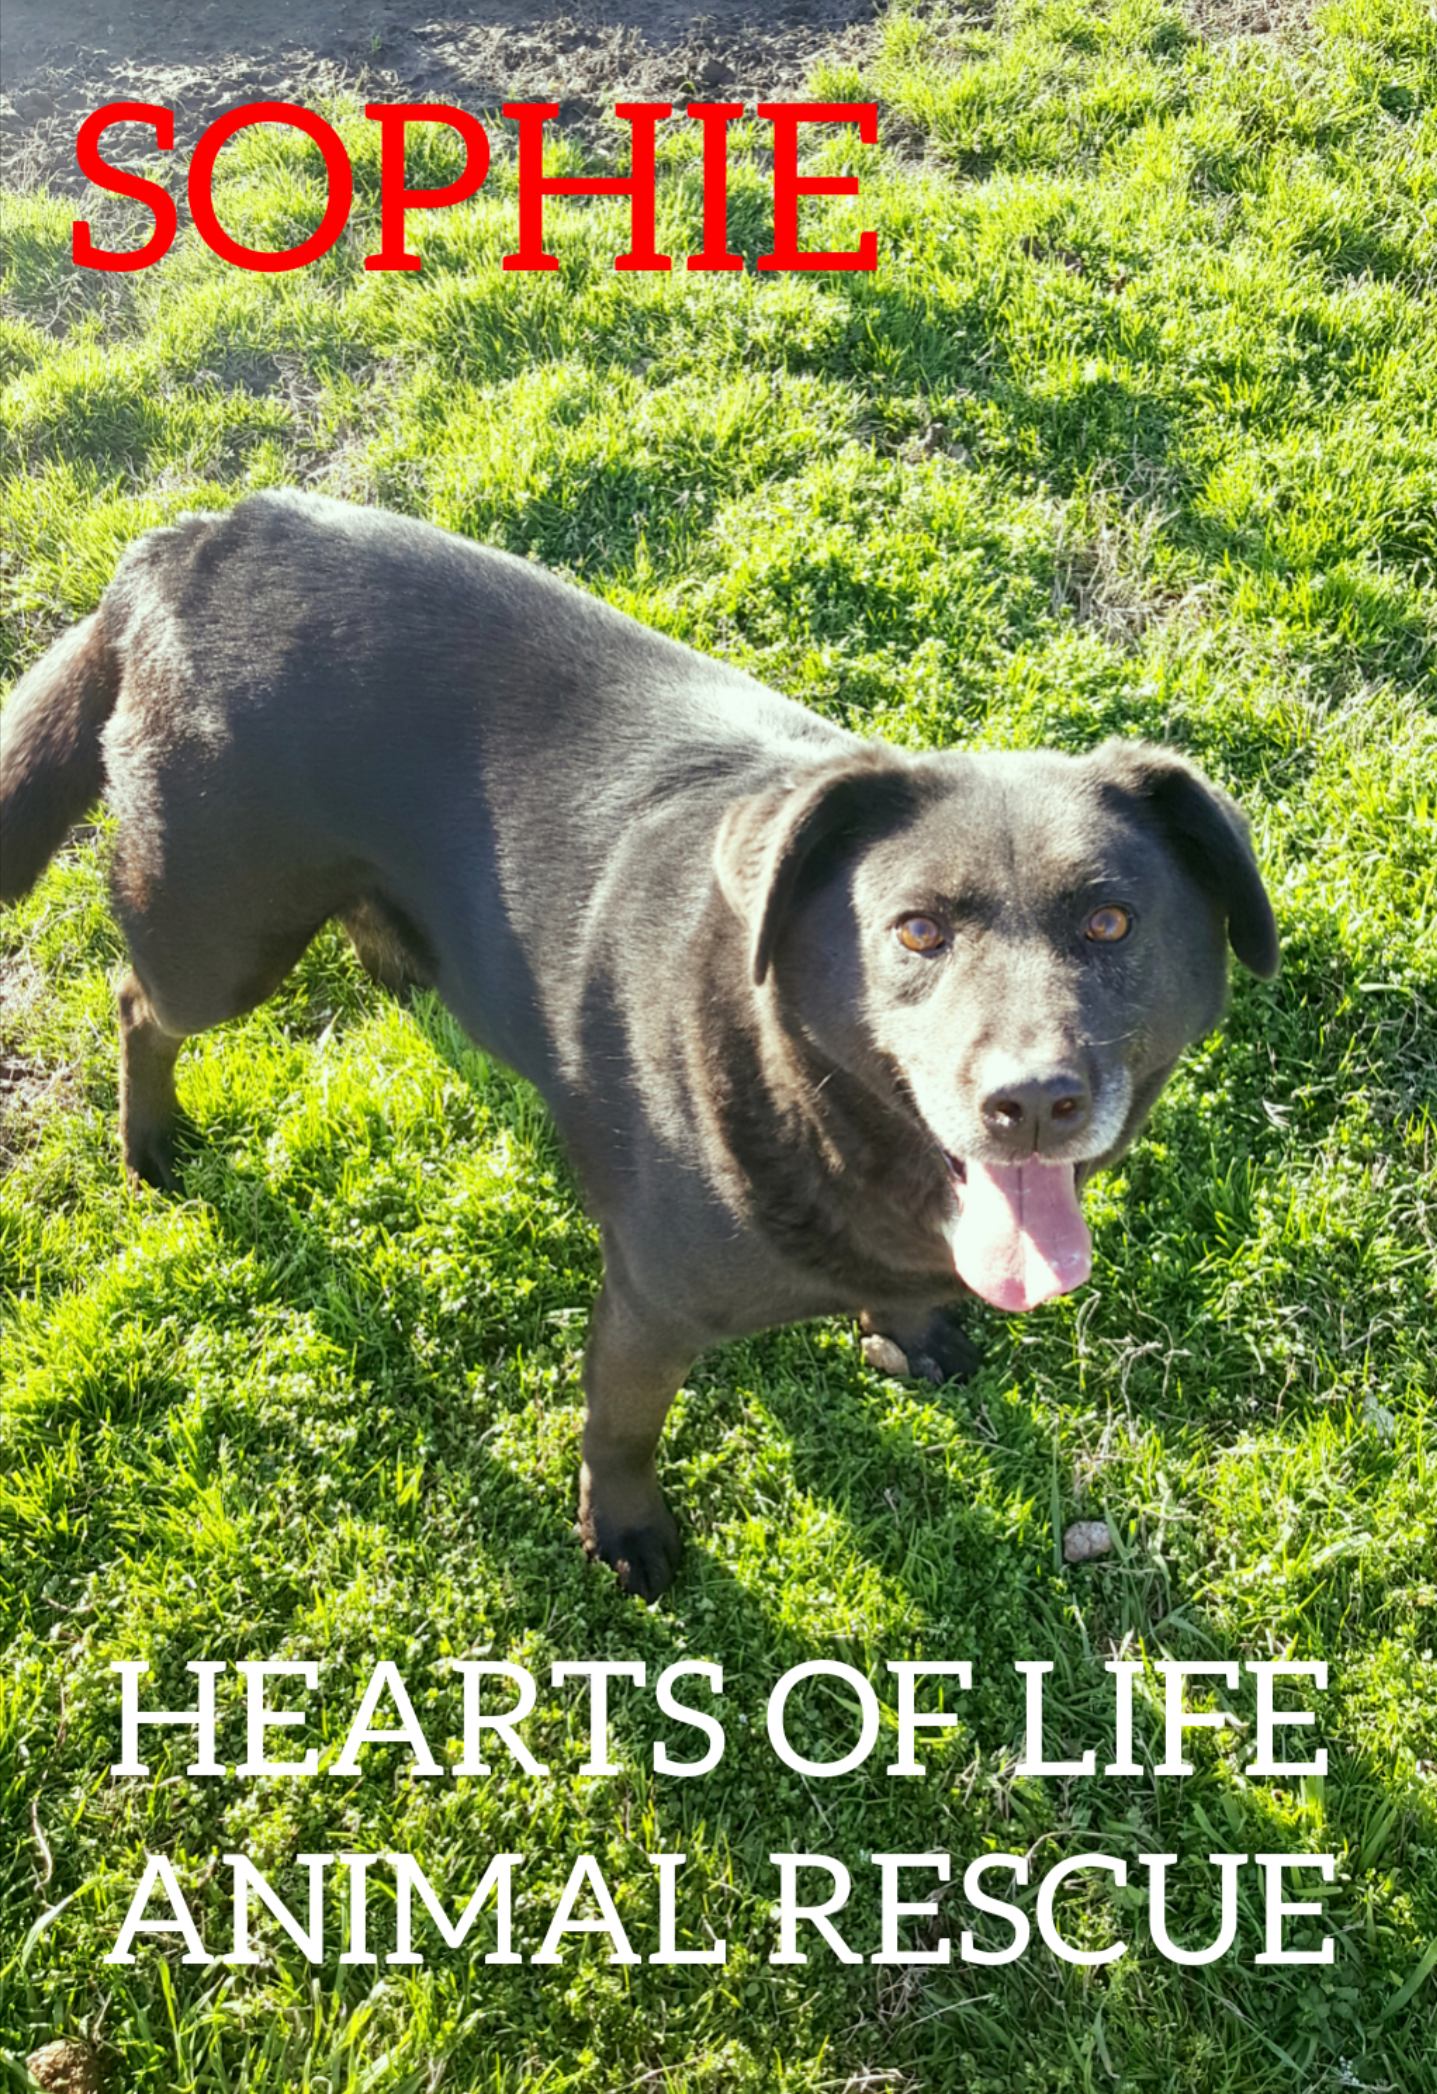 Hearts of Life Animal Rescue Dog of the Week: Meet Sophie!